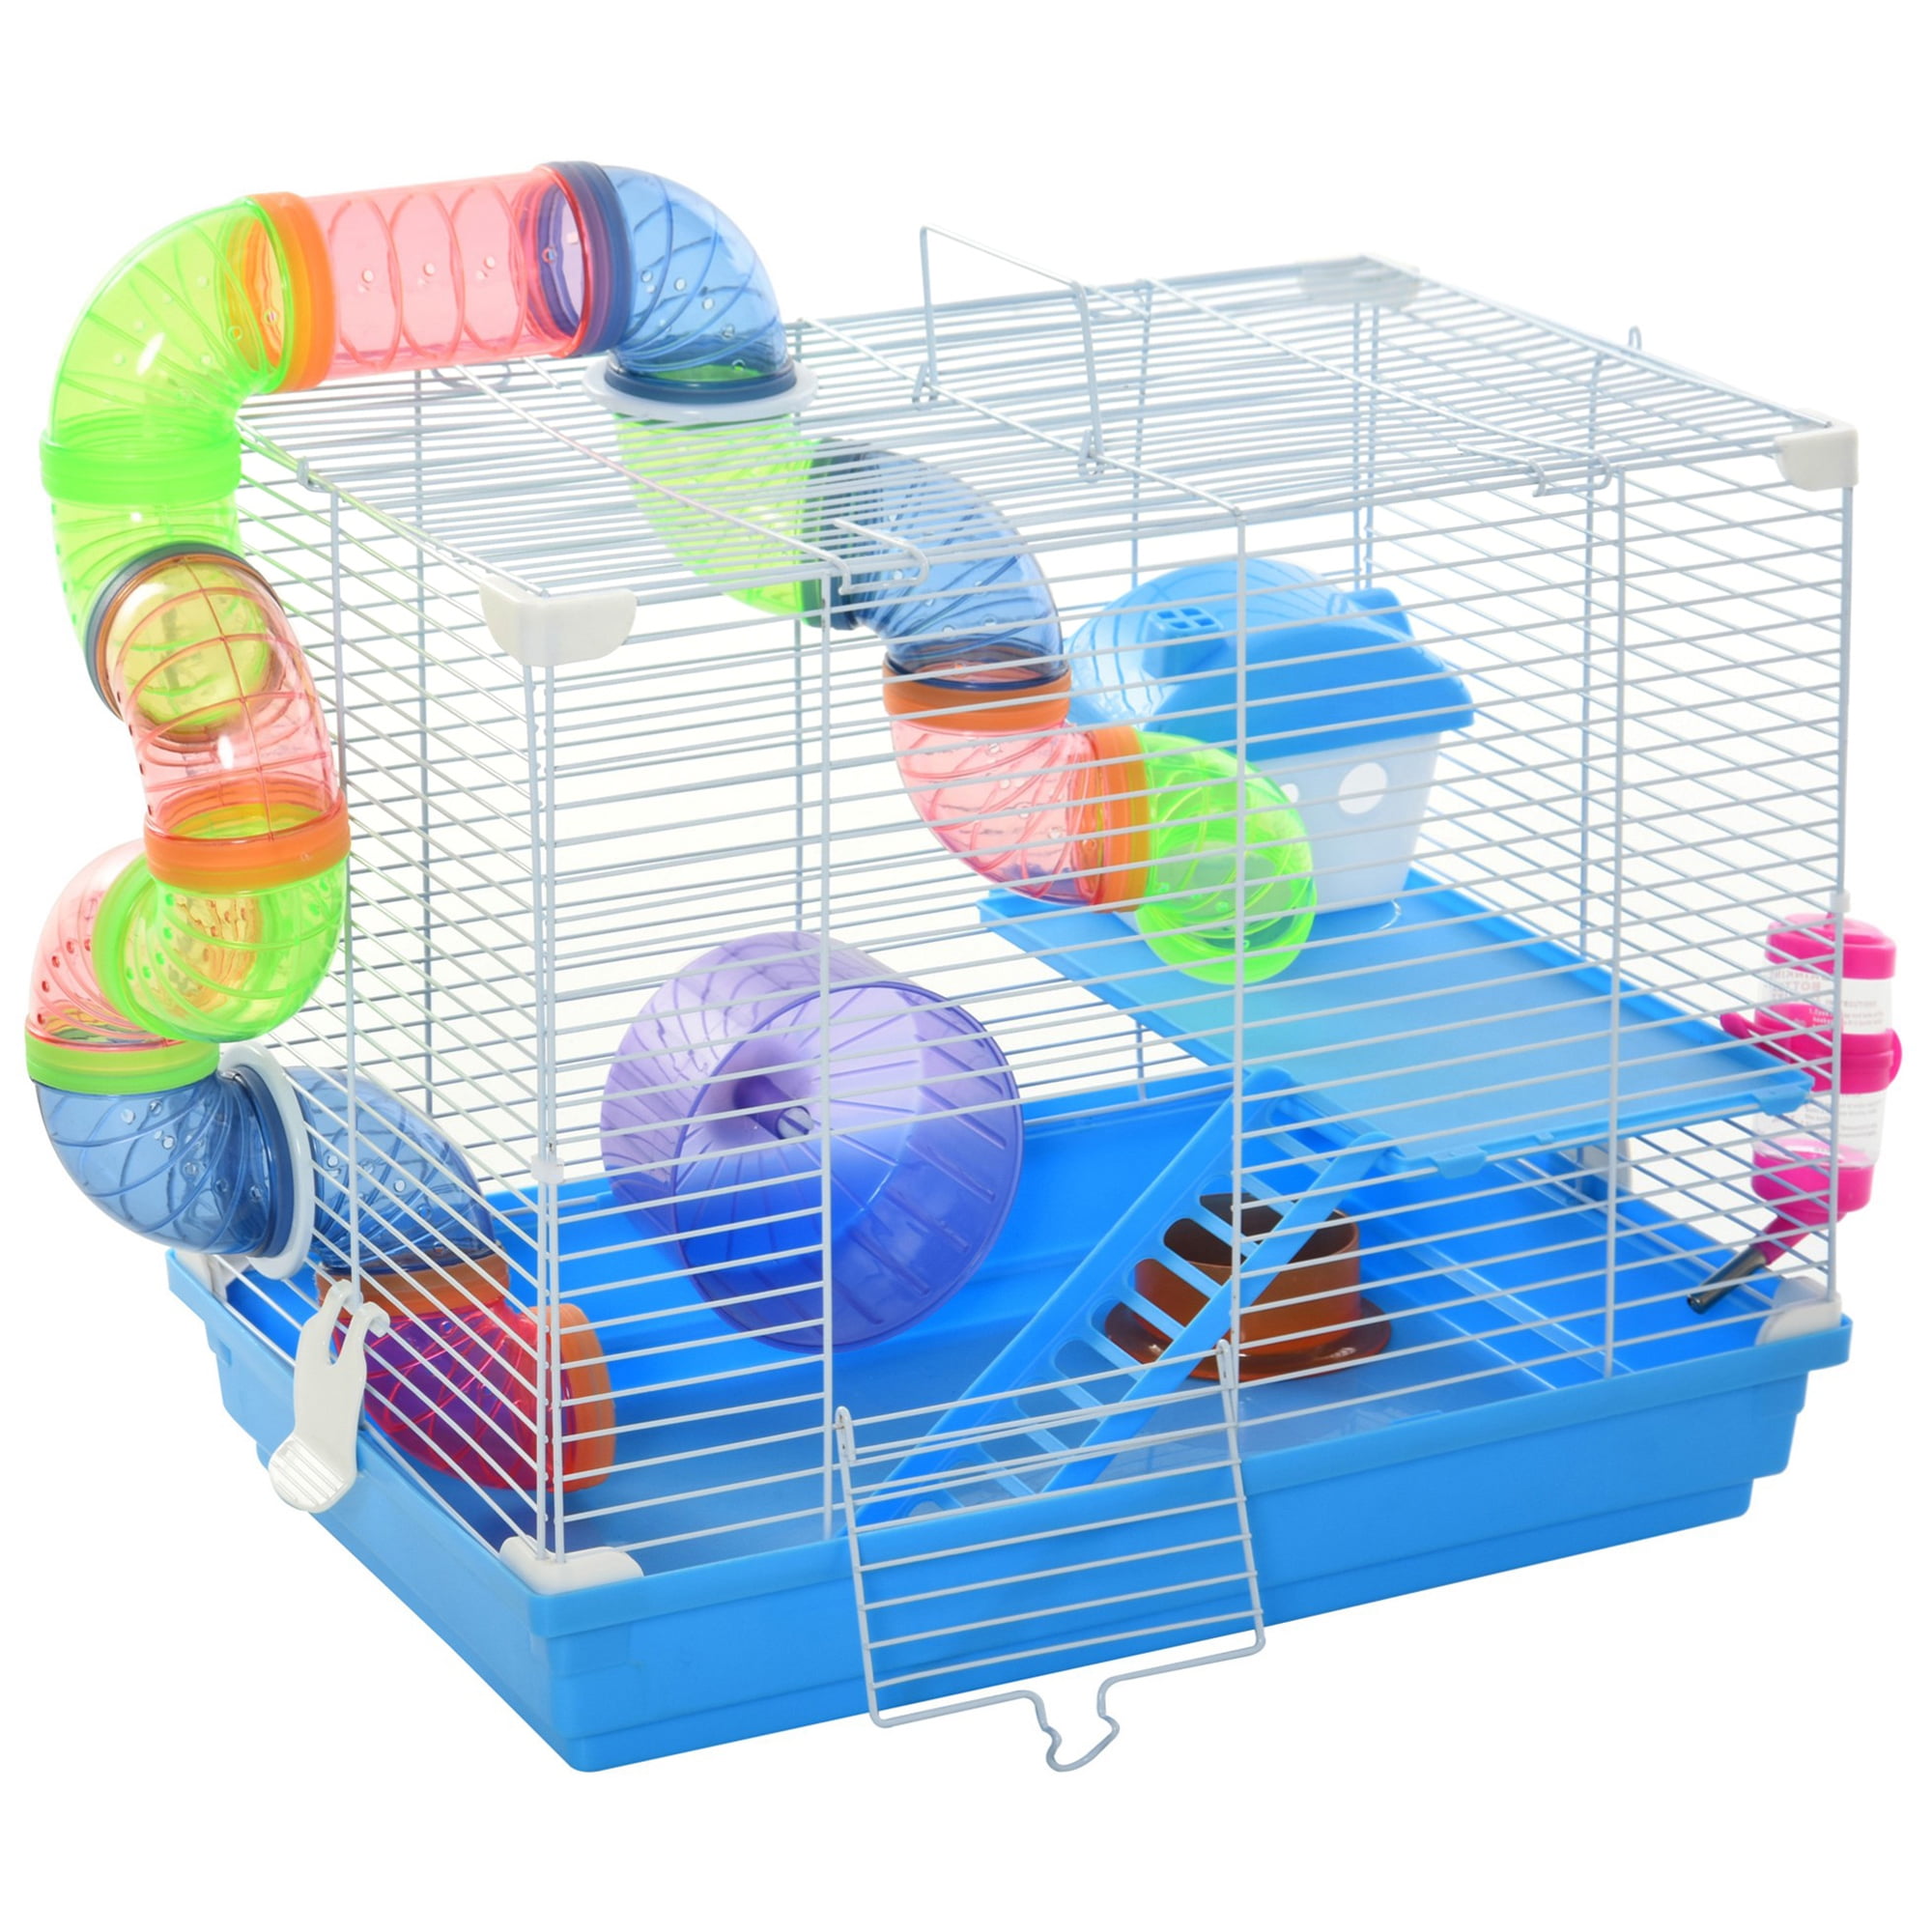 Pawhut 2-Level Hamster Cage Gerbil House Habitat Kit Small Animal Travel Carrier with Exercise Wheel, Play Tubes, Water Bottle, Food Dishes, & Interior Ladder - image 1 of 10